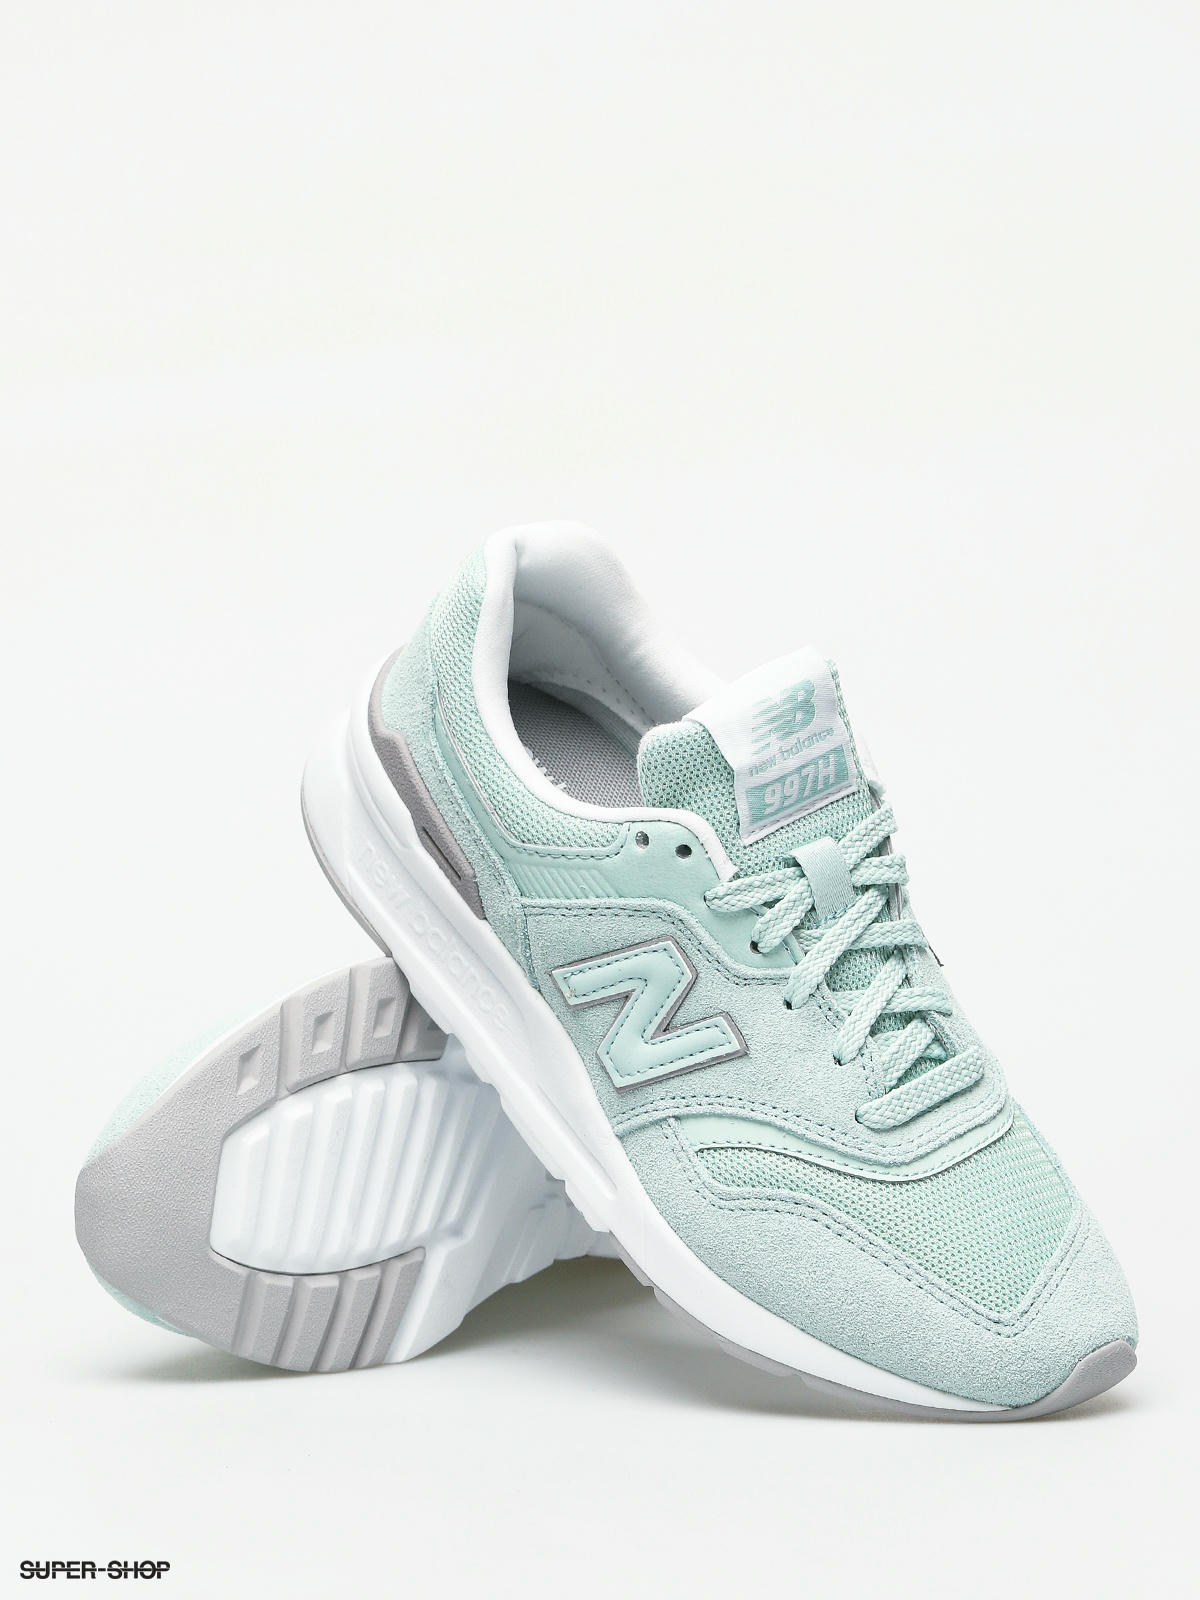 new balance 997 sport sandstone with white agave